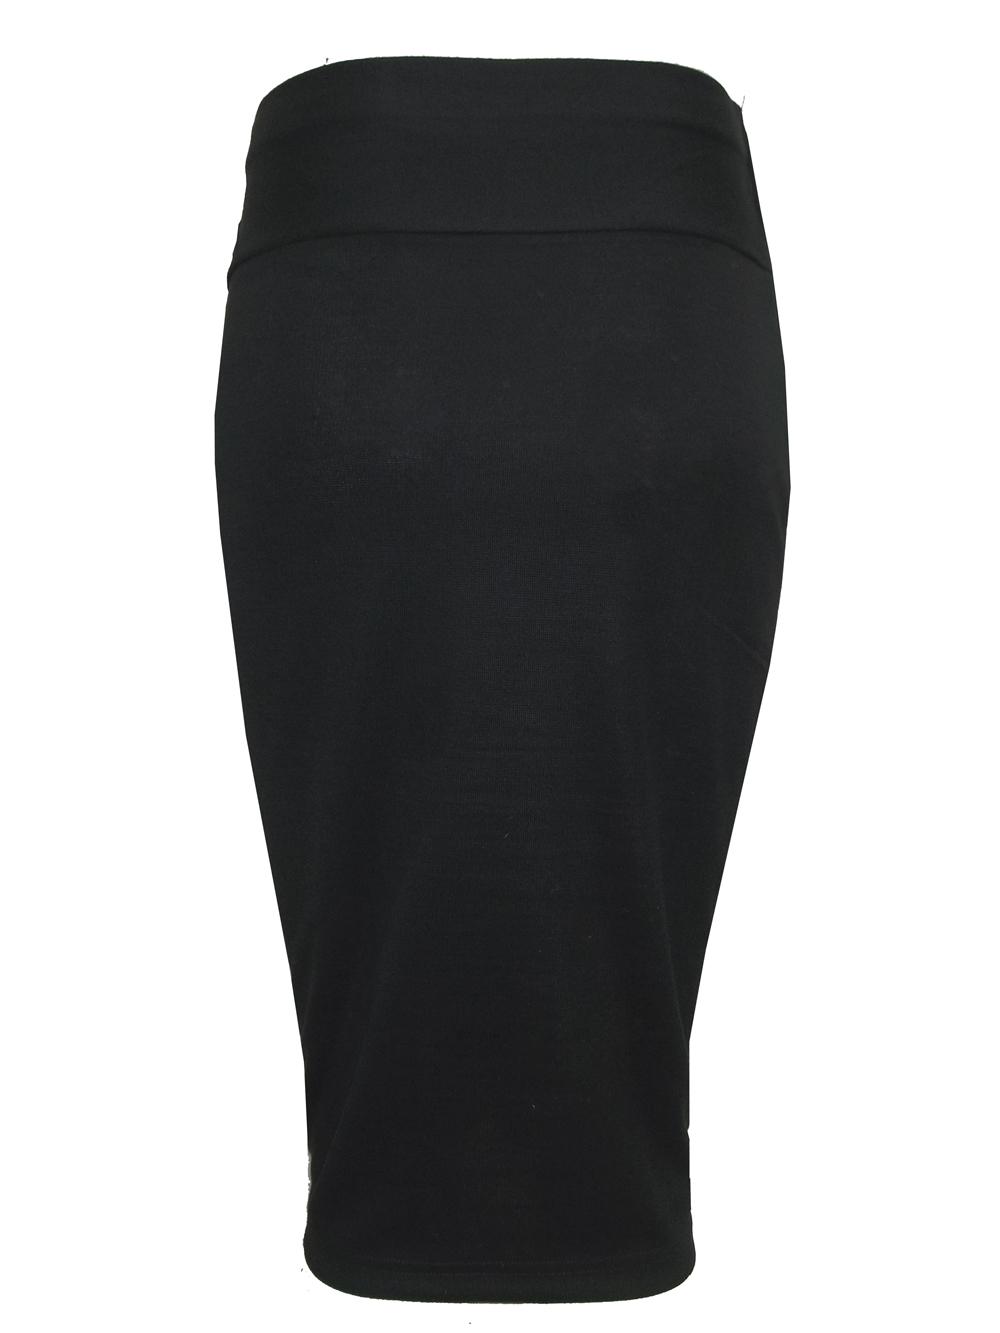 Marks and Spencer - - M&5 BLACK Wide Waistband Midi Skirt - Size 8 to 14